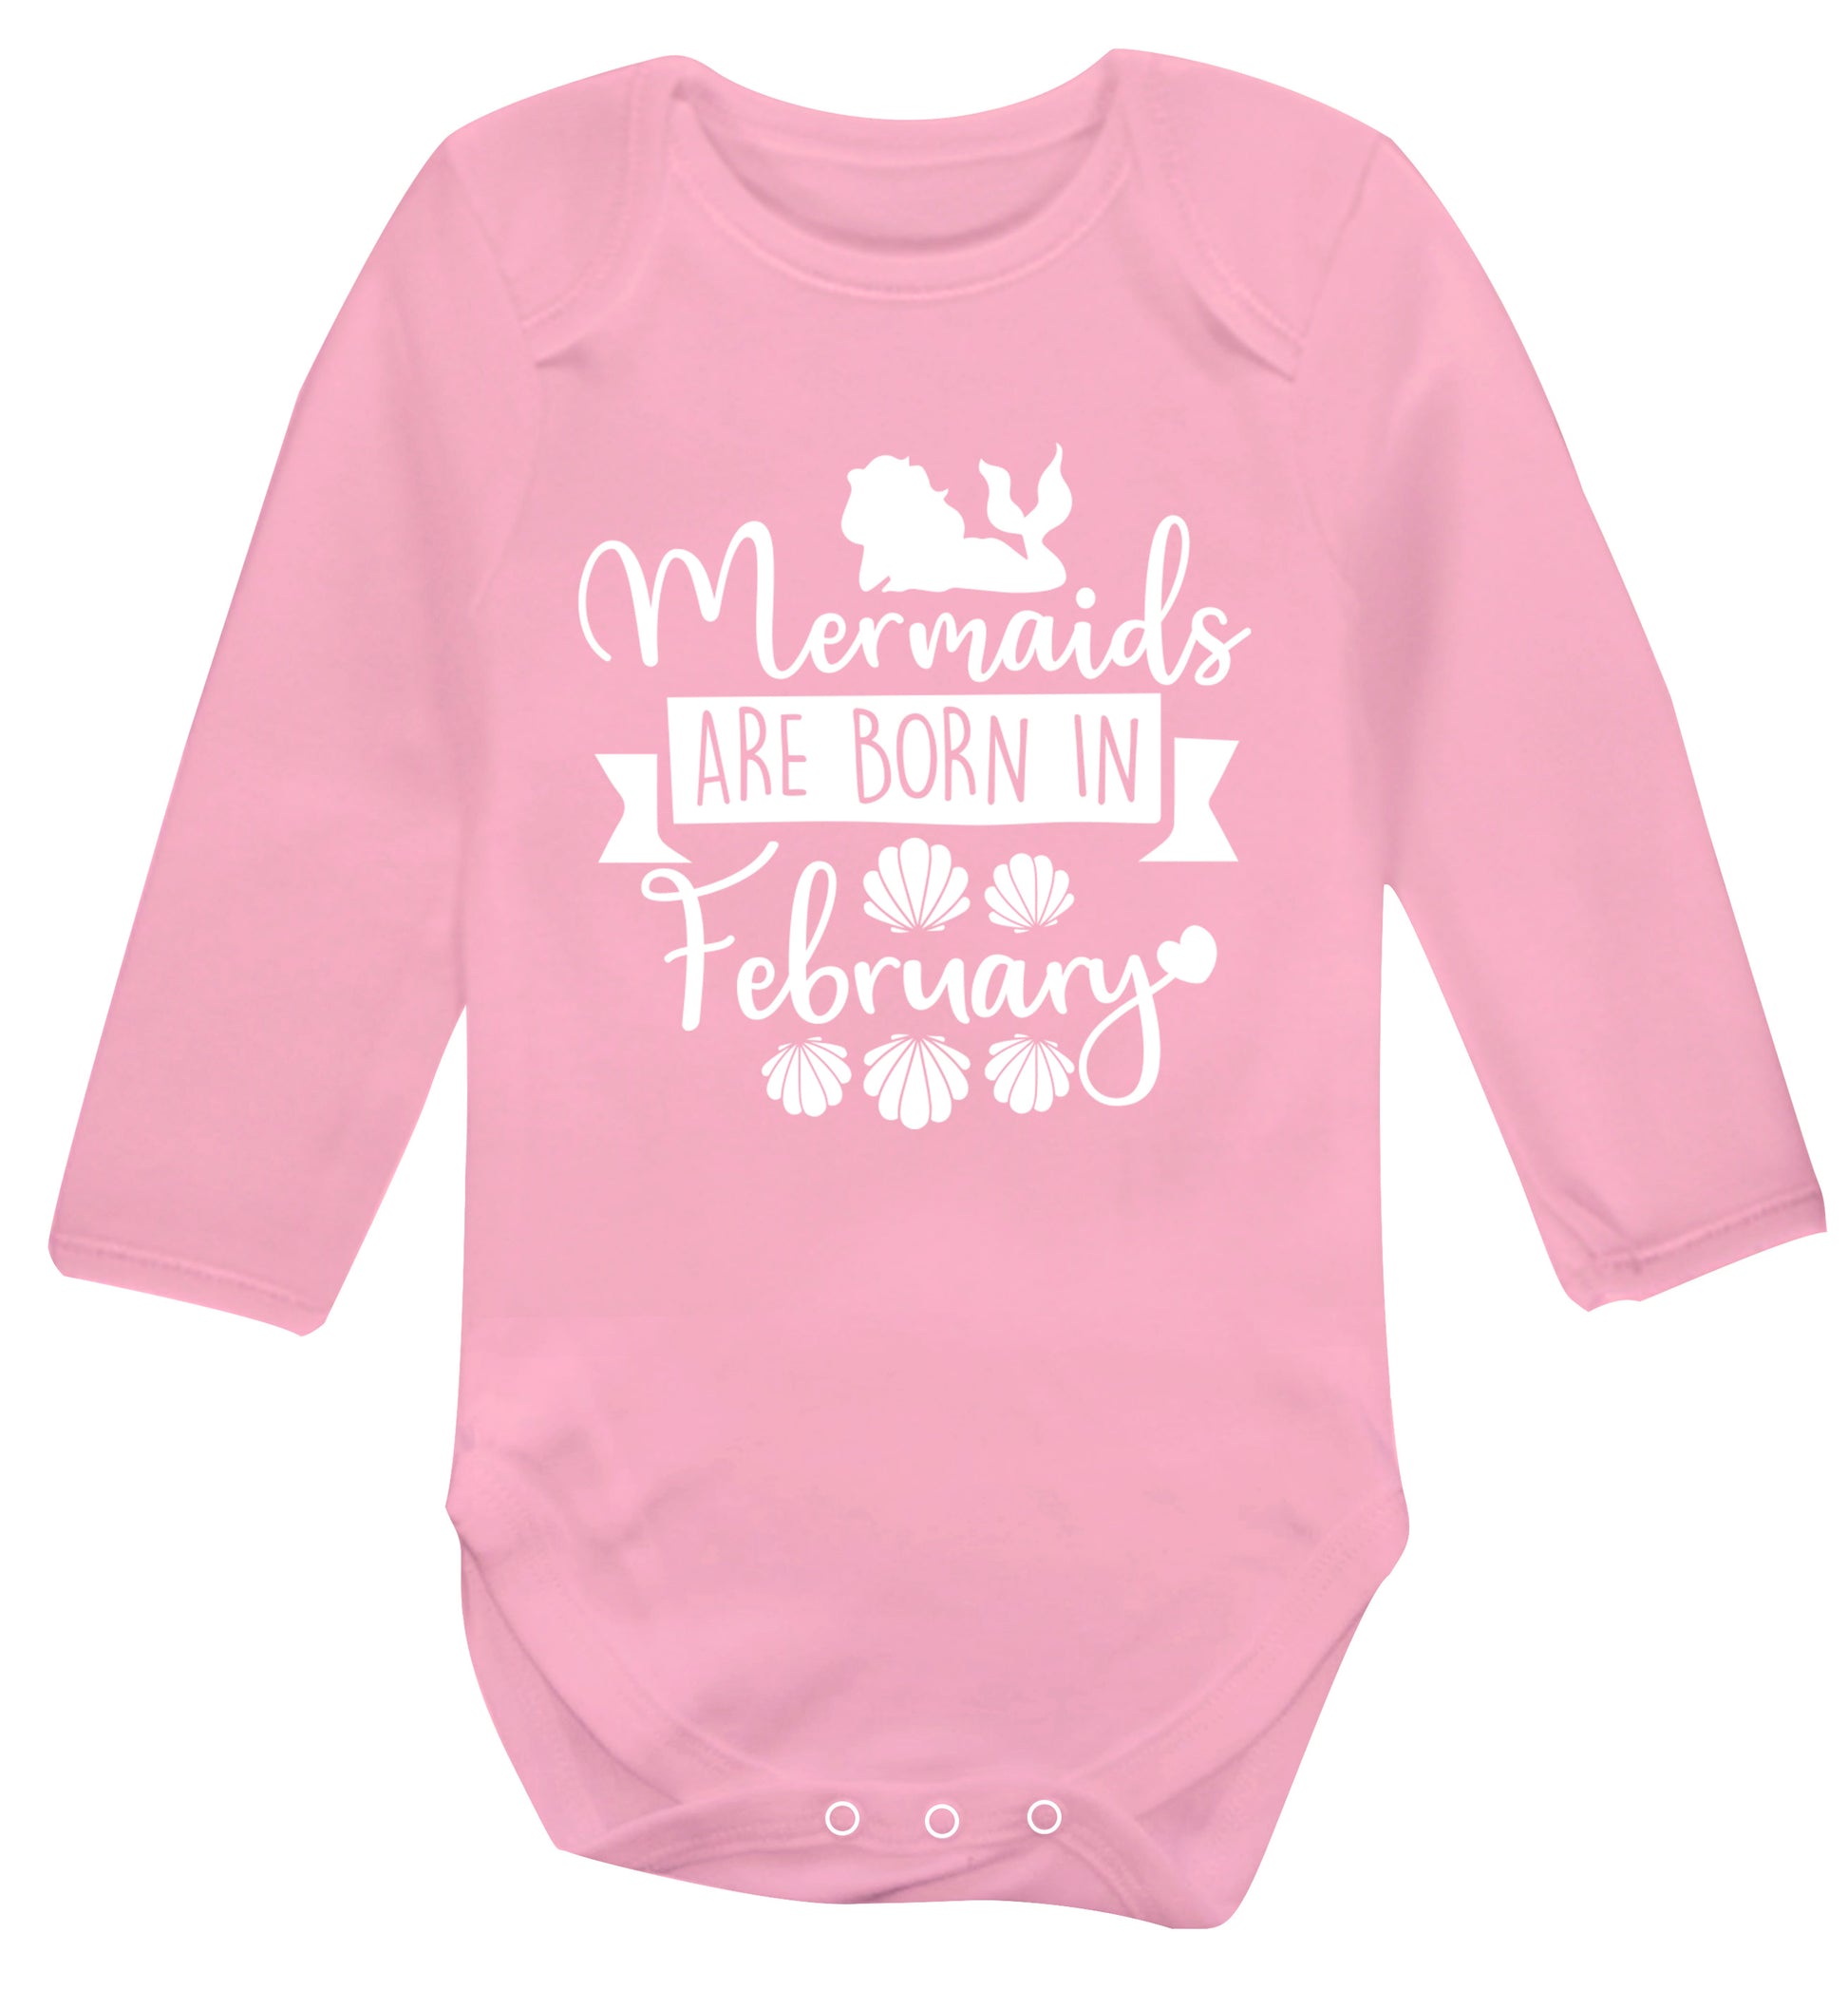 Mermaids are born in February Baby Vest long sleeved pale pink 6-12 months